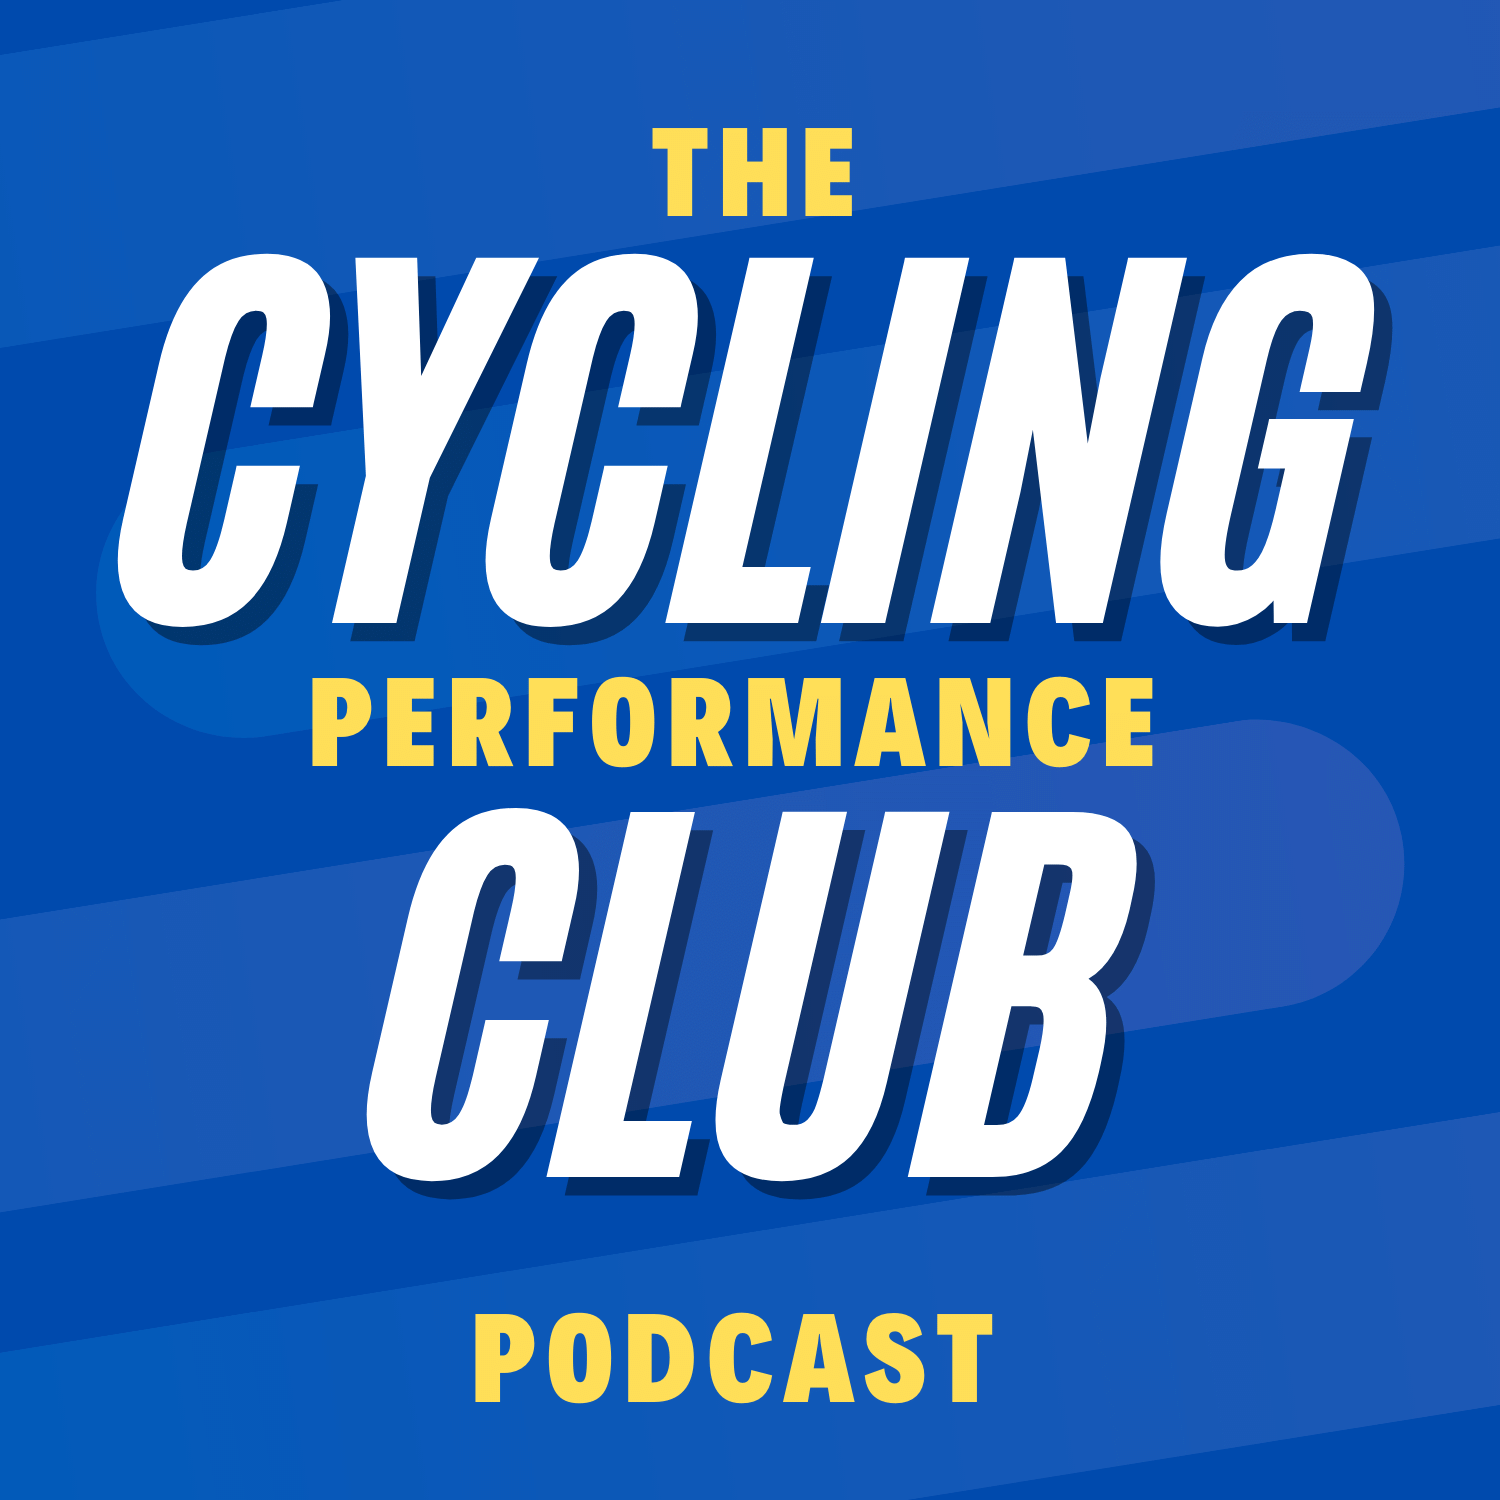 Australian Road National Championships, Training Apps, The Coach's Role in an Athlete's Success, and Critical Power Musings